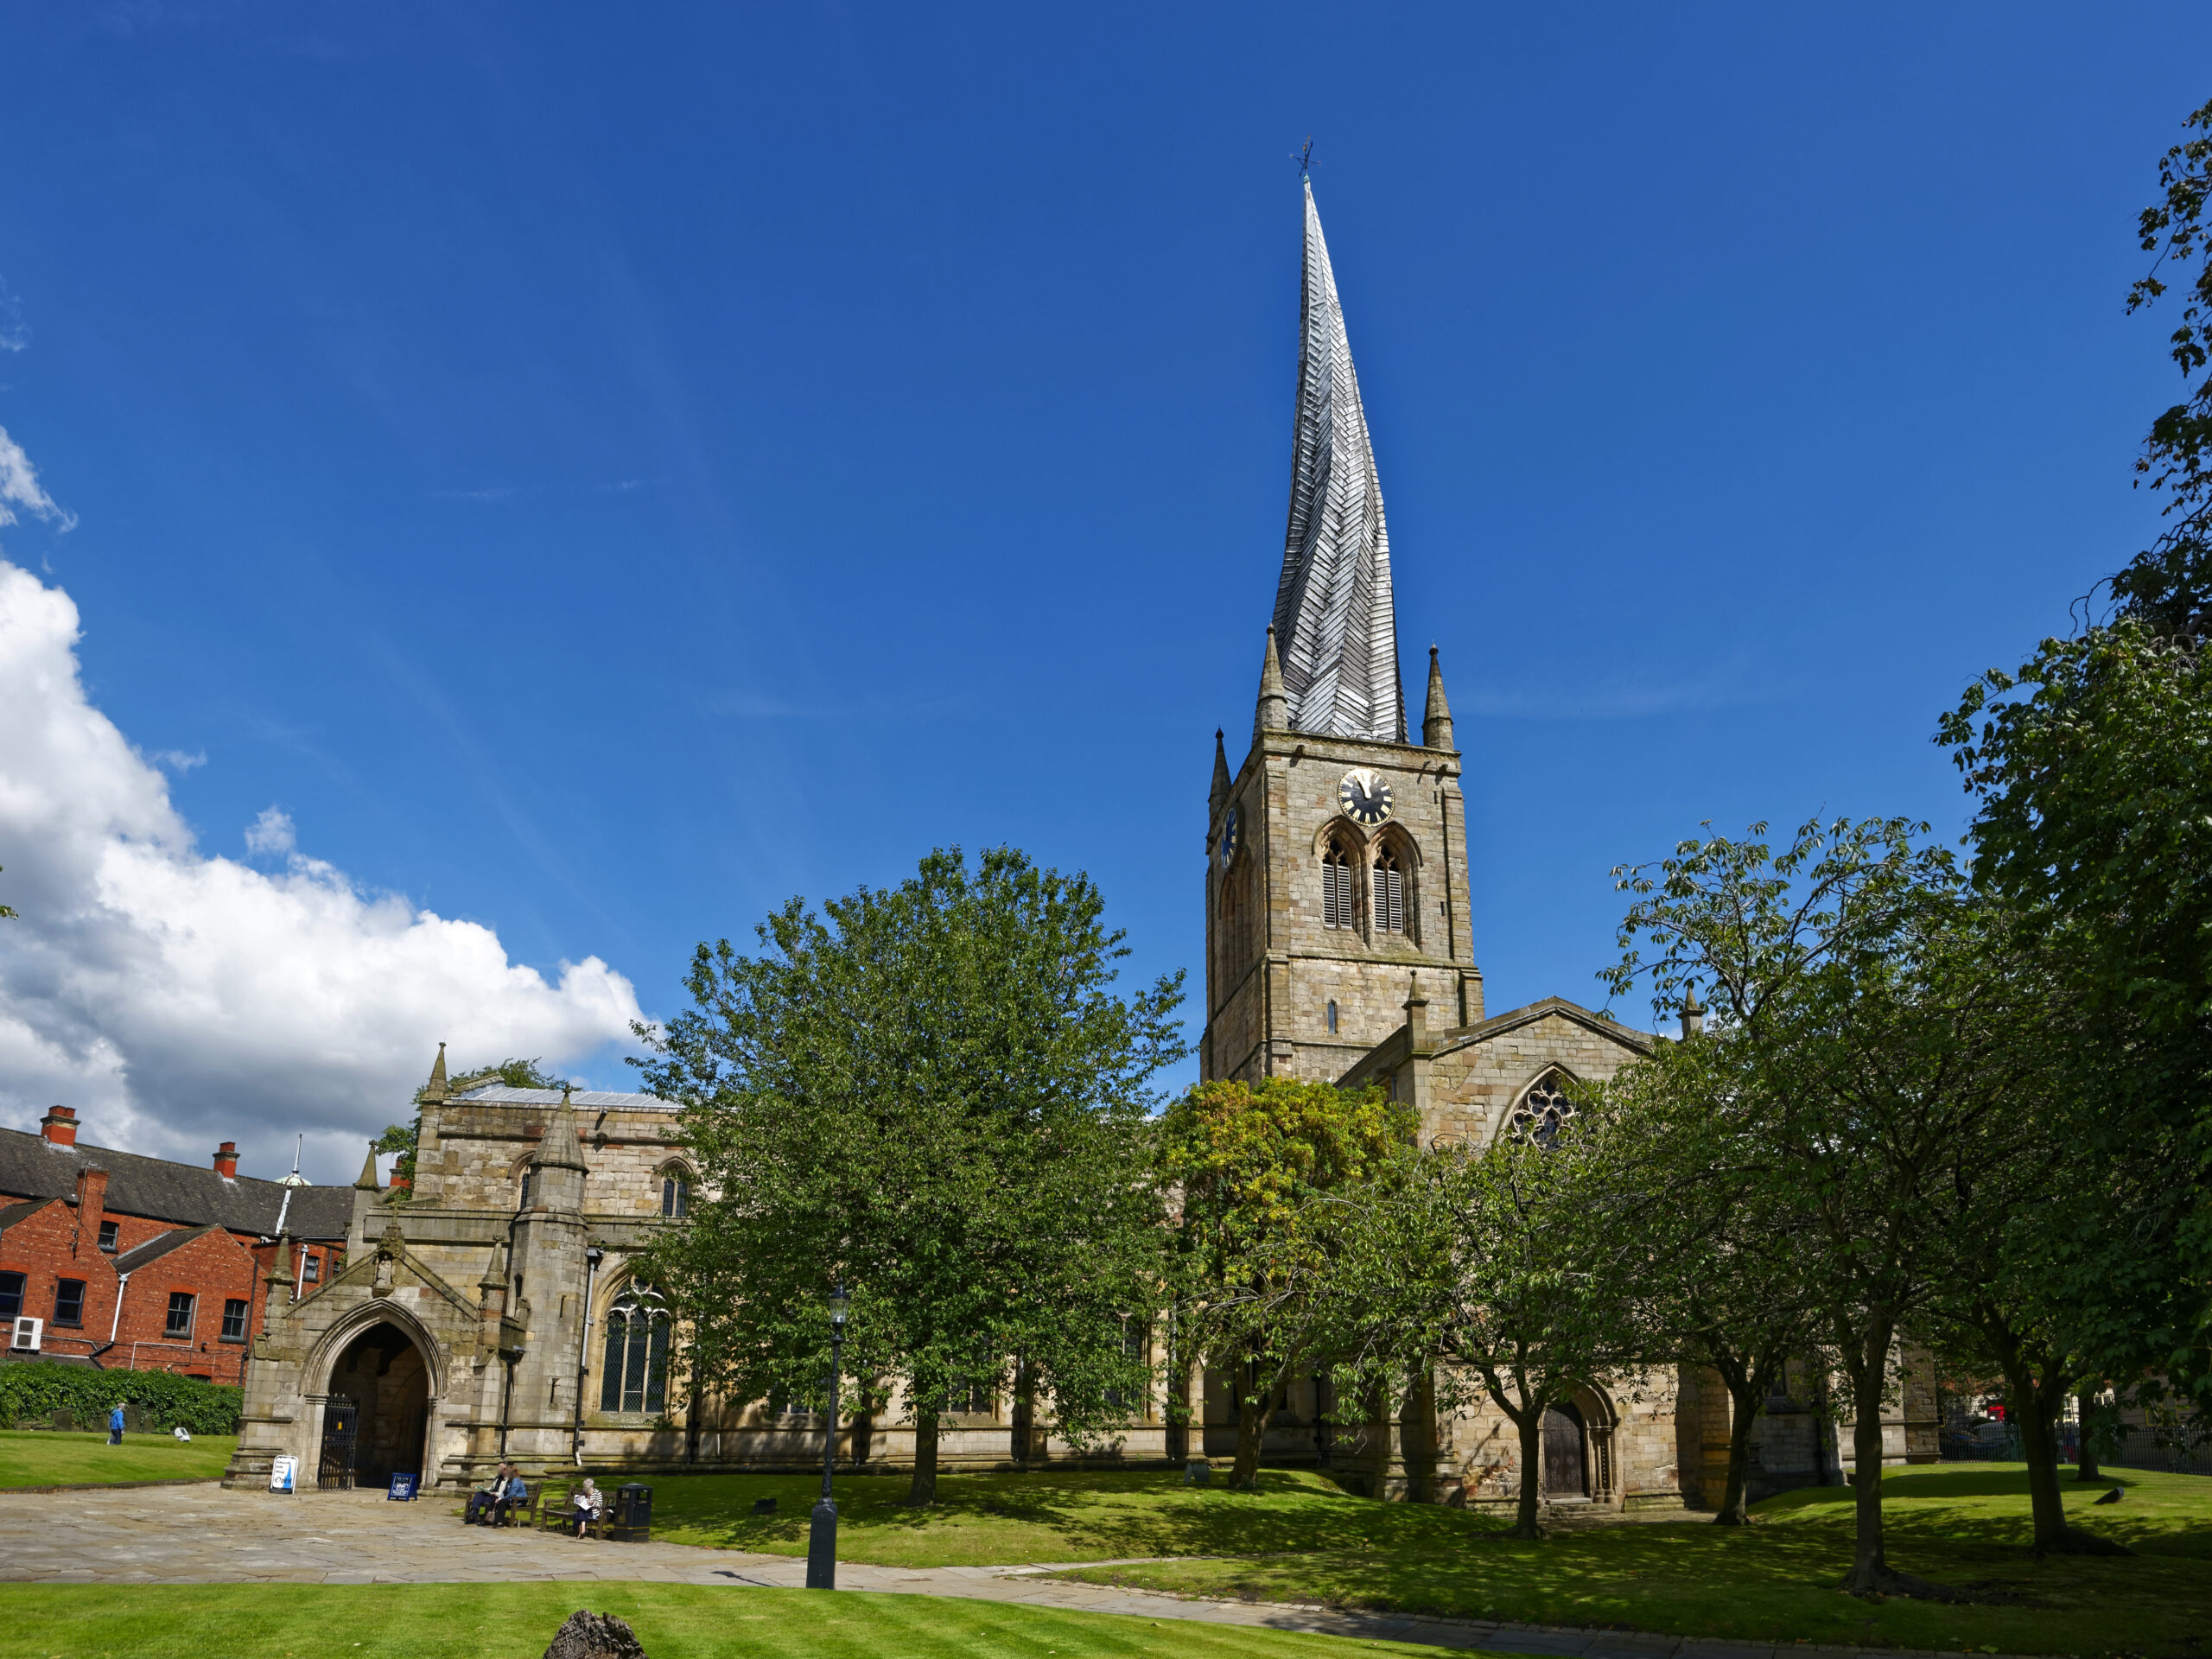 Image of a church in Chesterfield where we do Pat Testing